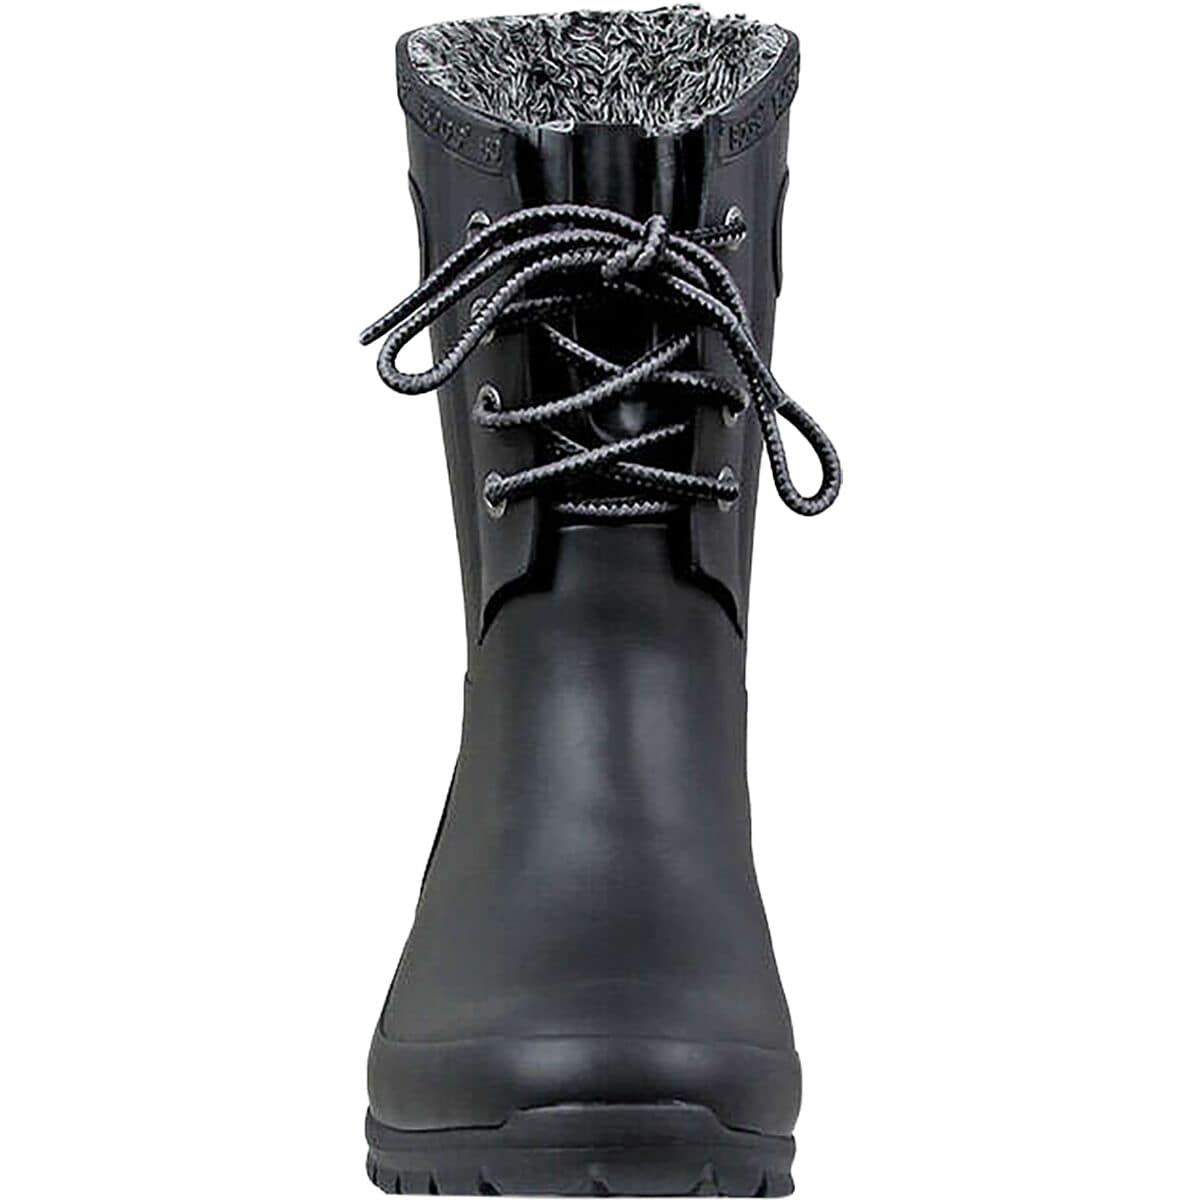 Legacy Lace 6in Boot - Women's